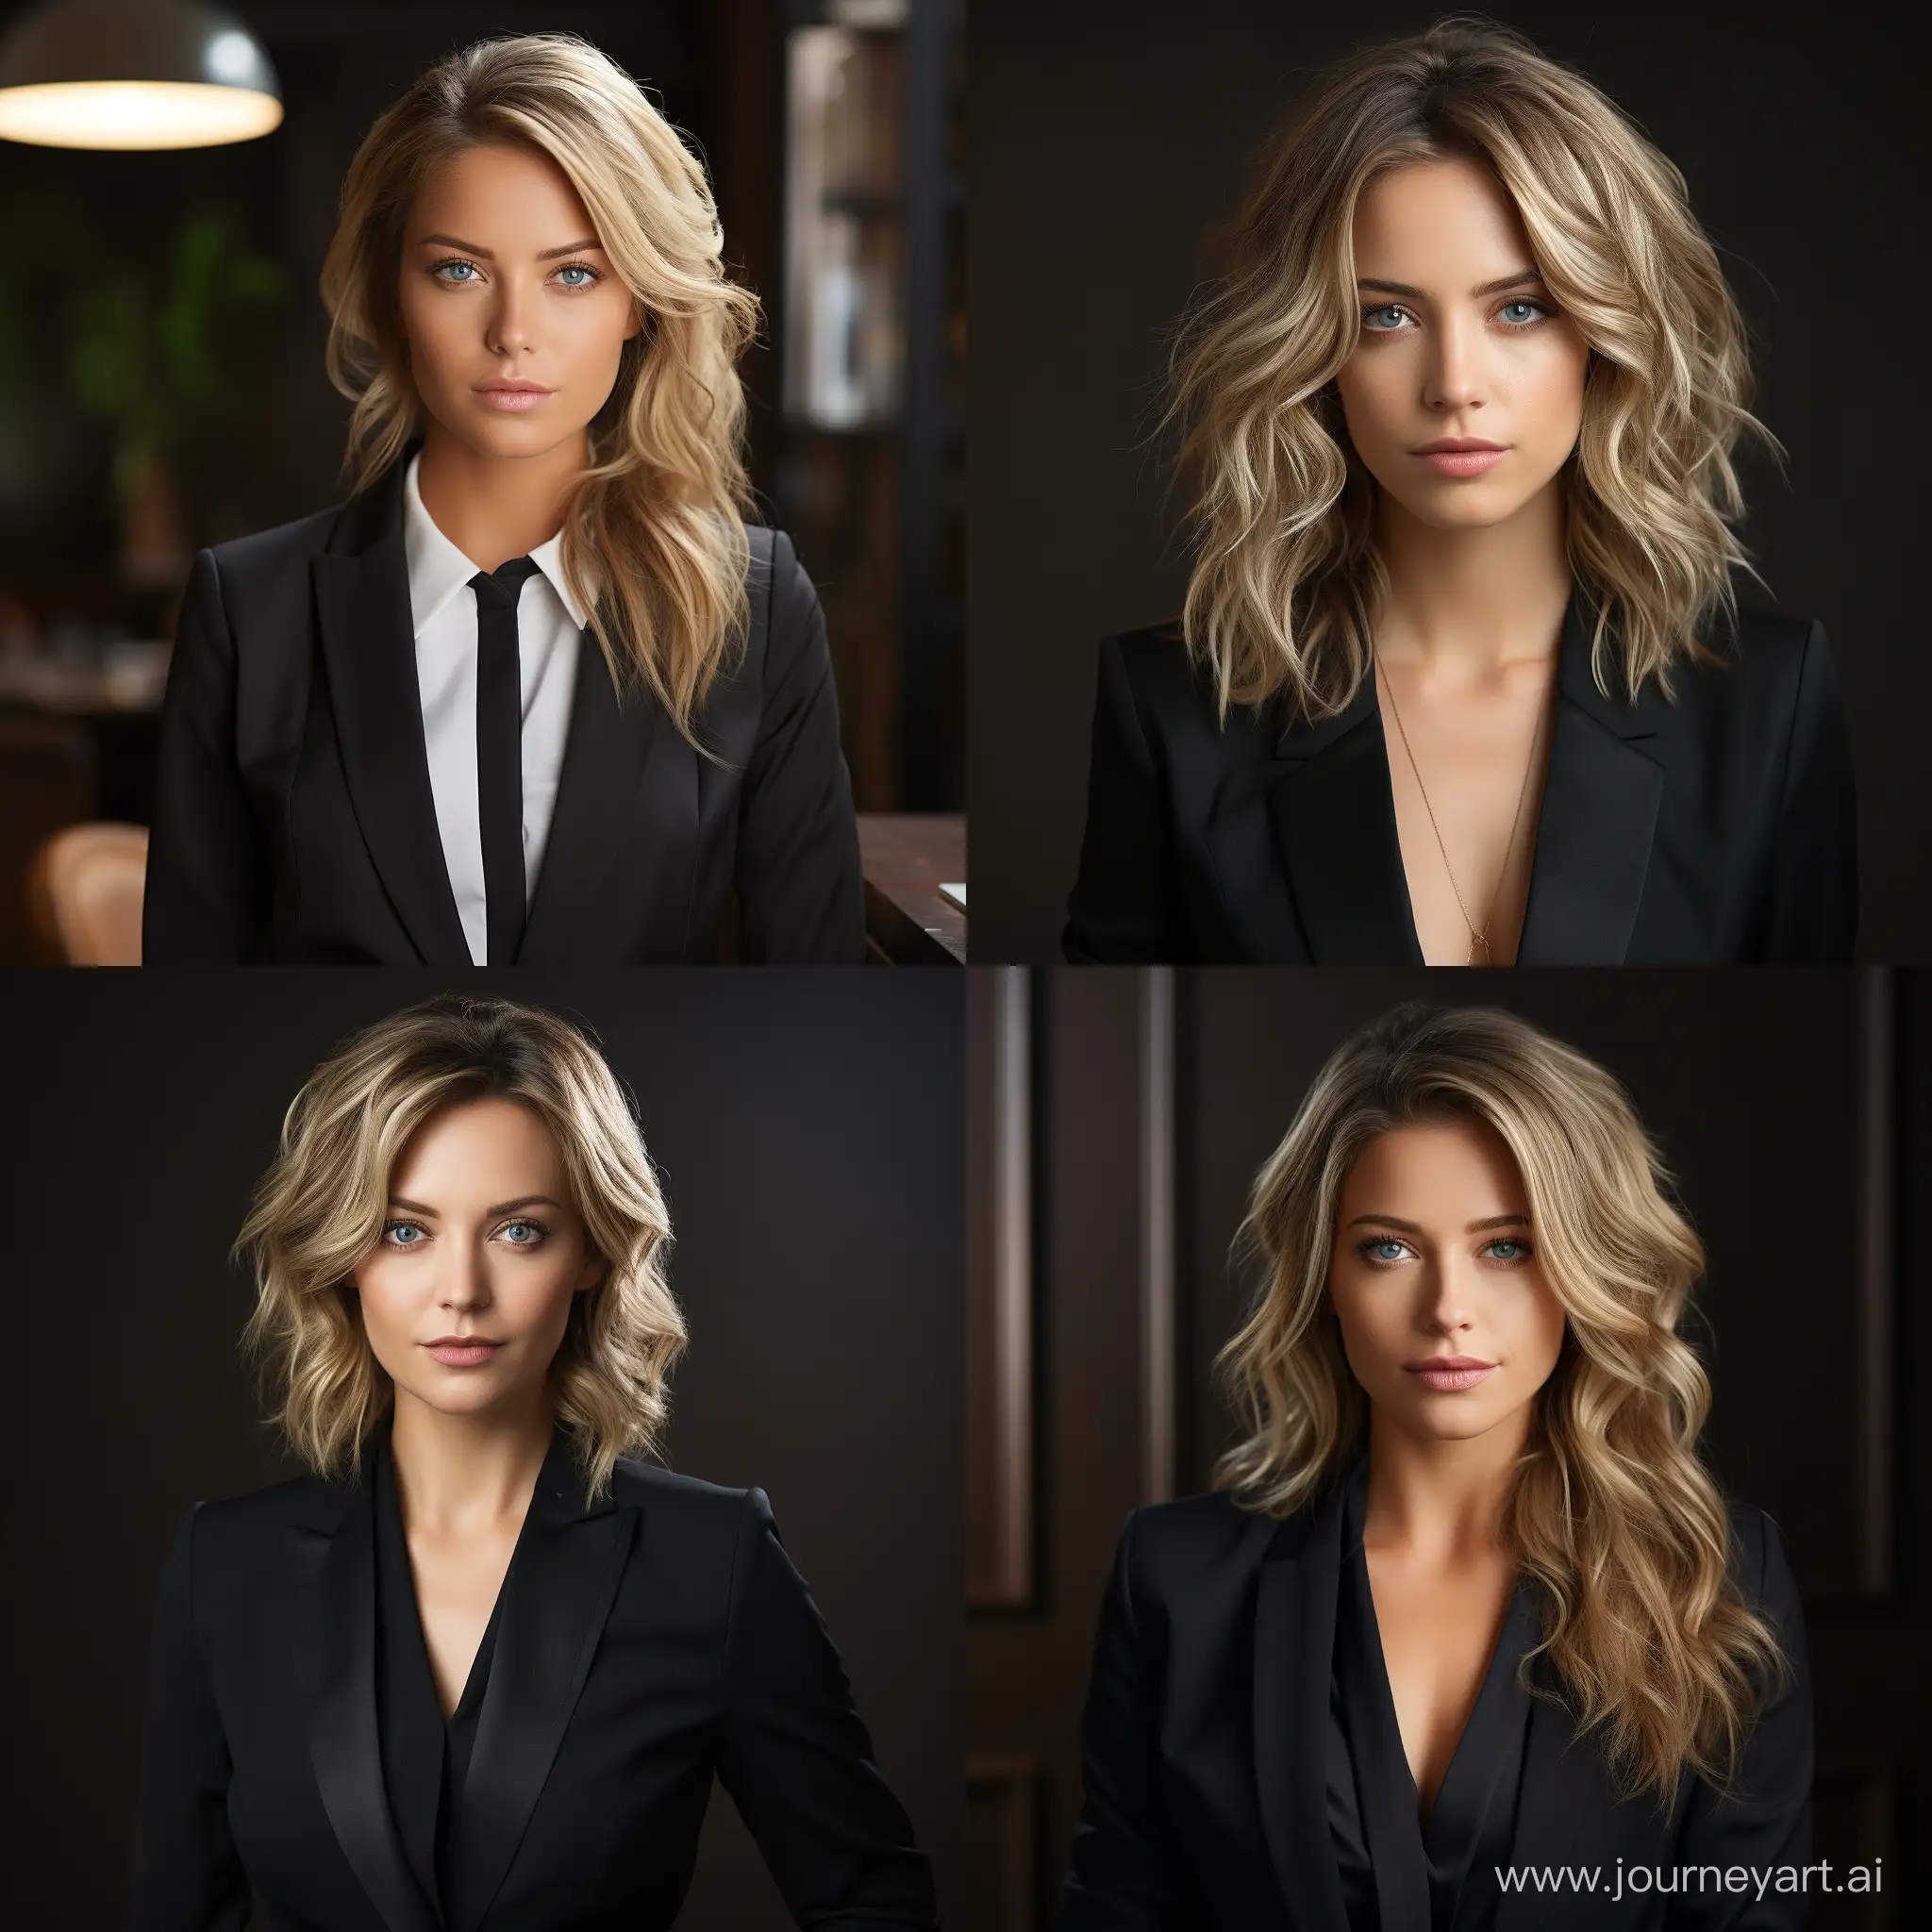 Slavic-Business-Woman-in-Stylish-Suit-with-Shoulderlength-Light-Hair